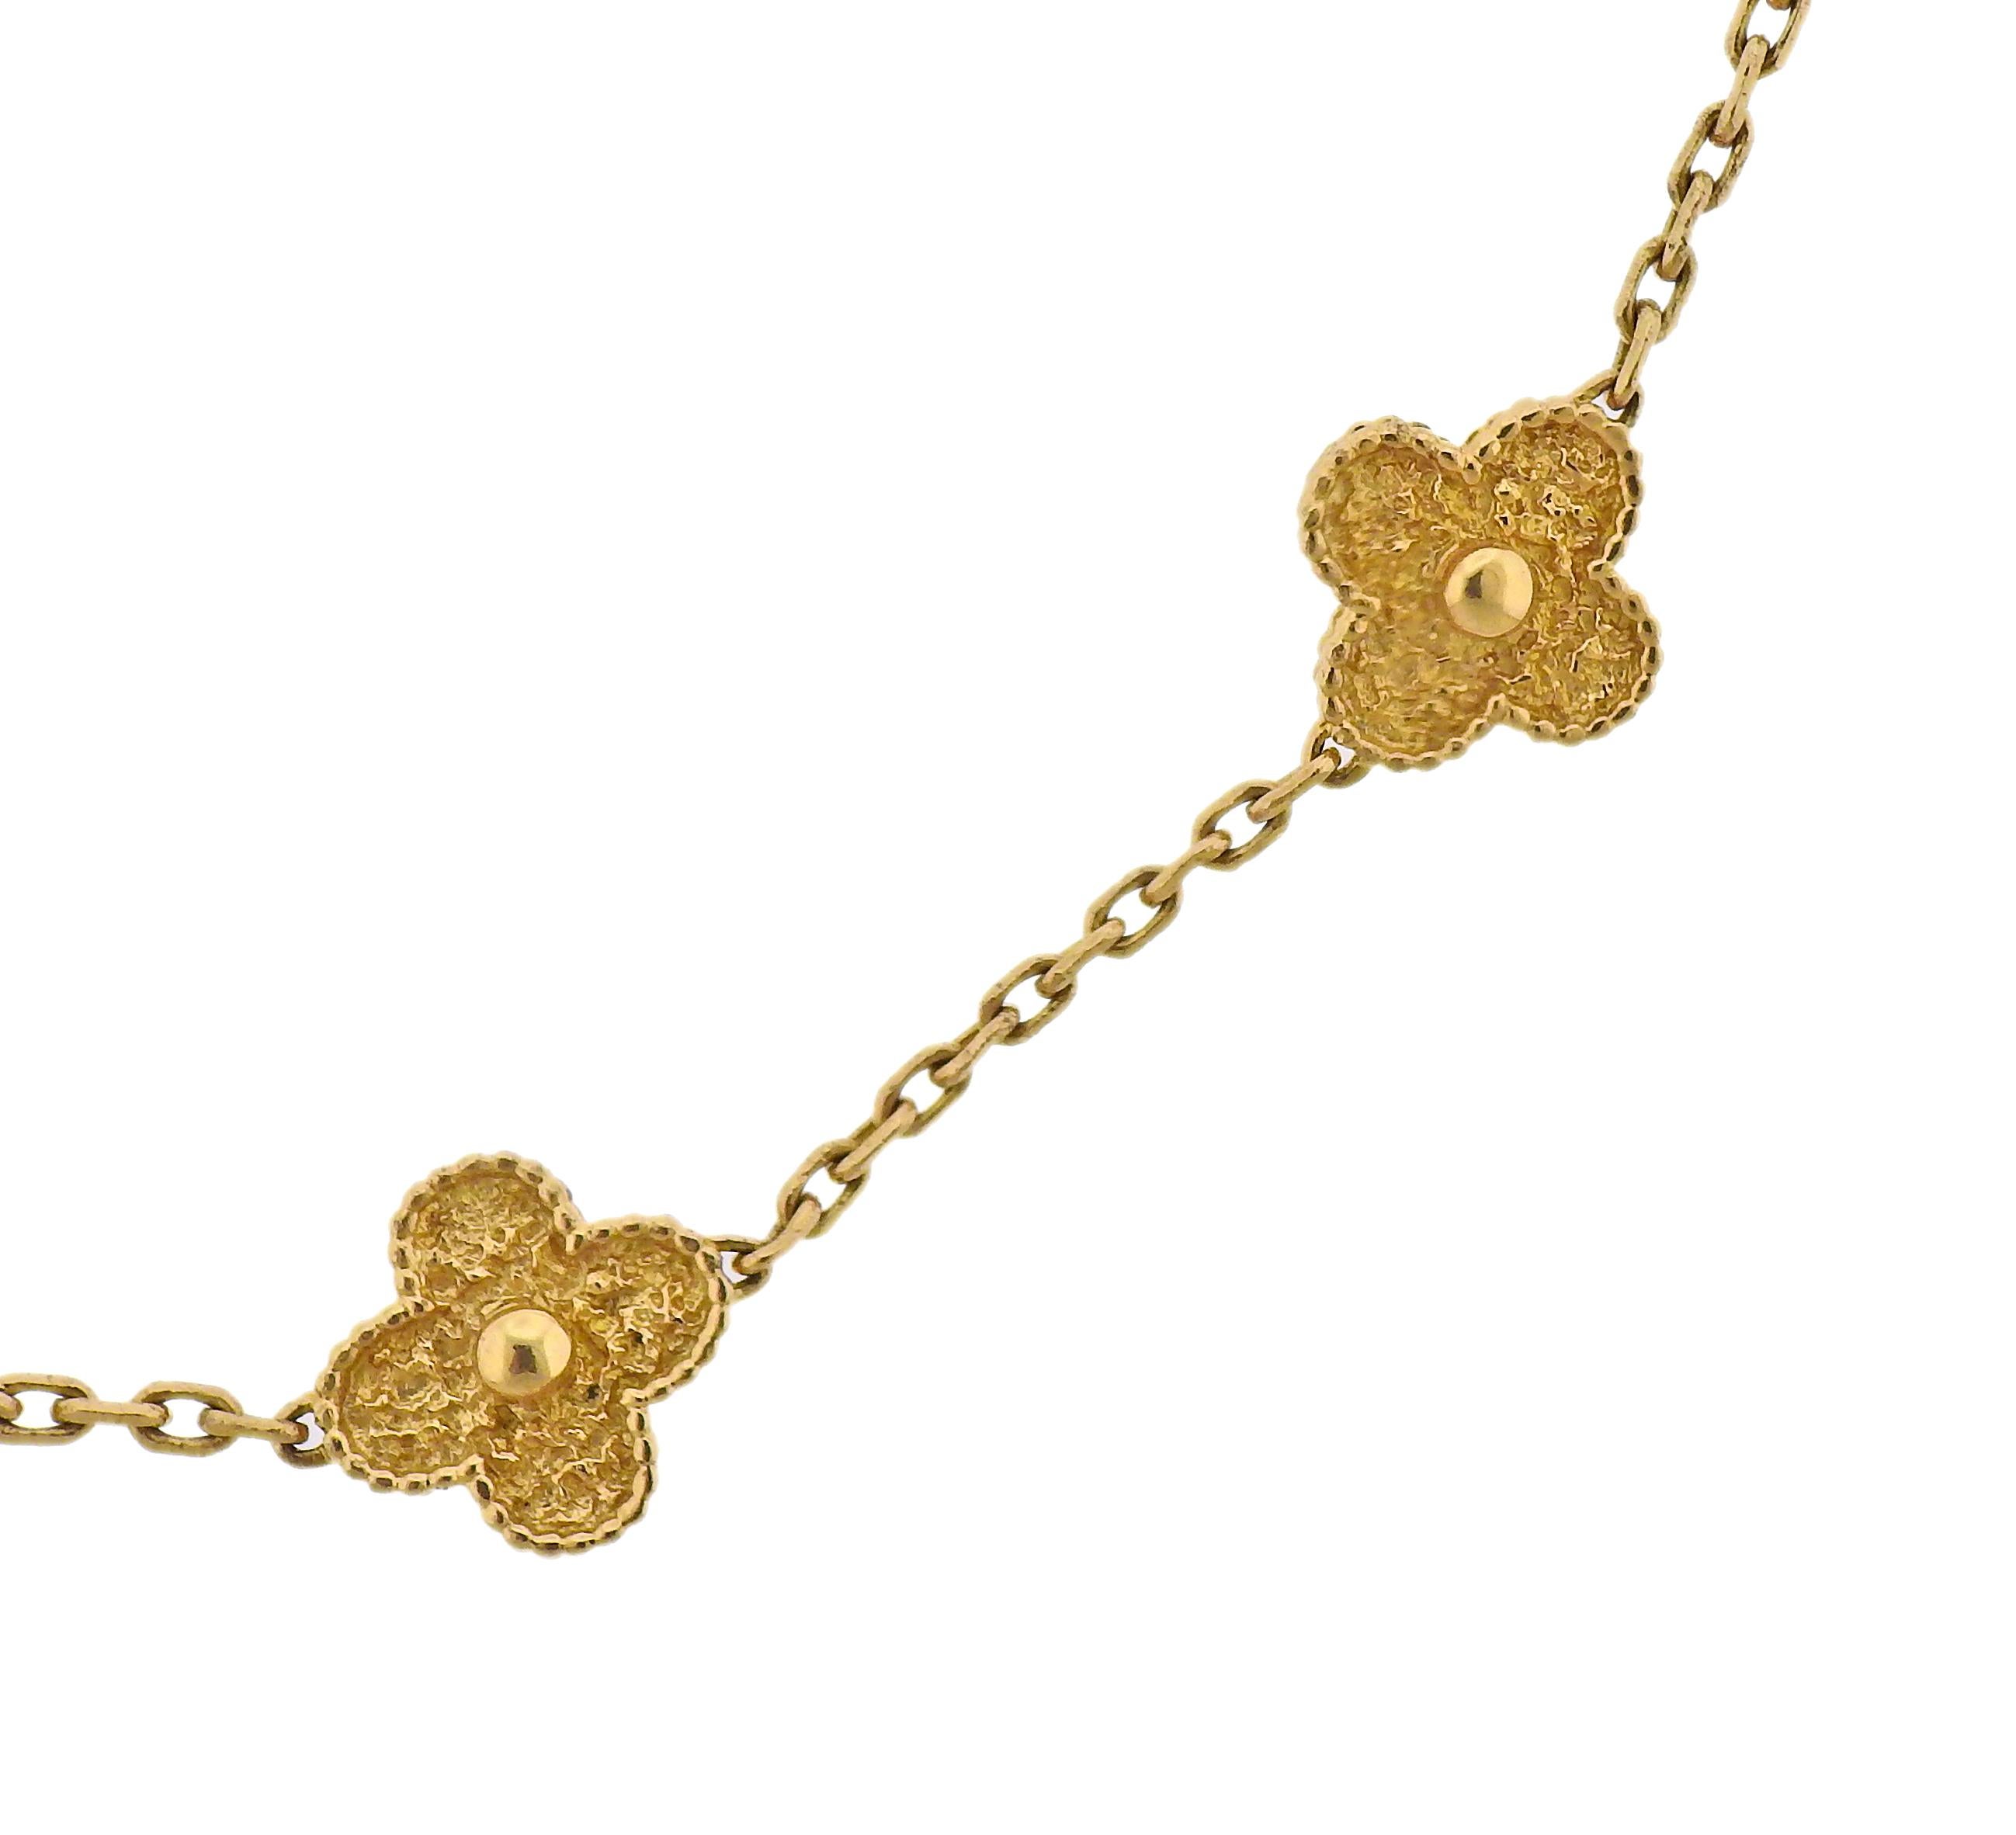 Iconic Vintage Alhambra 10 clover motif necklace by Van Cleef & Arpels, in 18k yellow gold. Necklace is 16.5